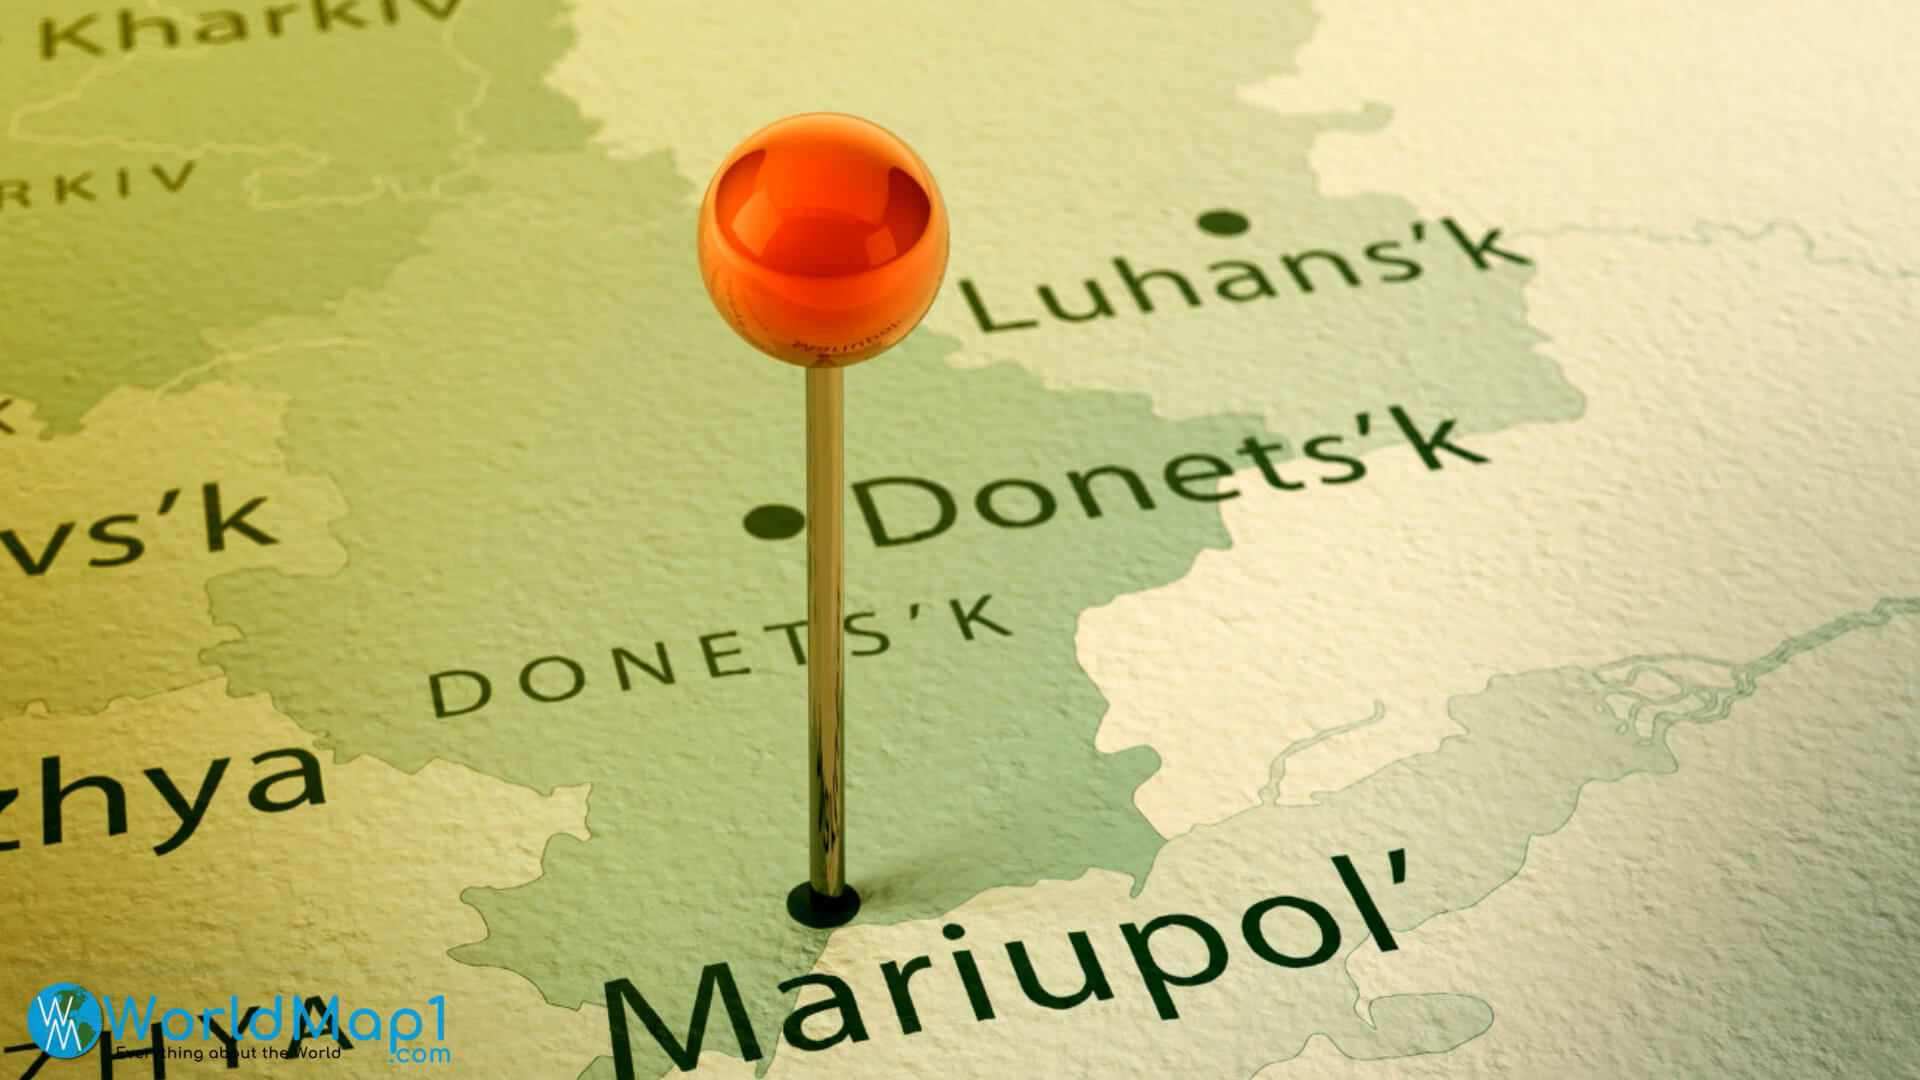 Mariupol and Donets Map in Ukraine